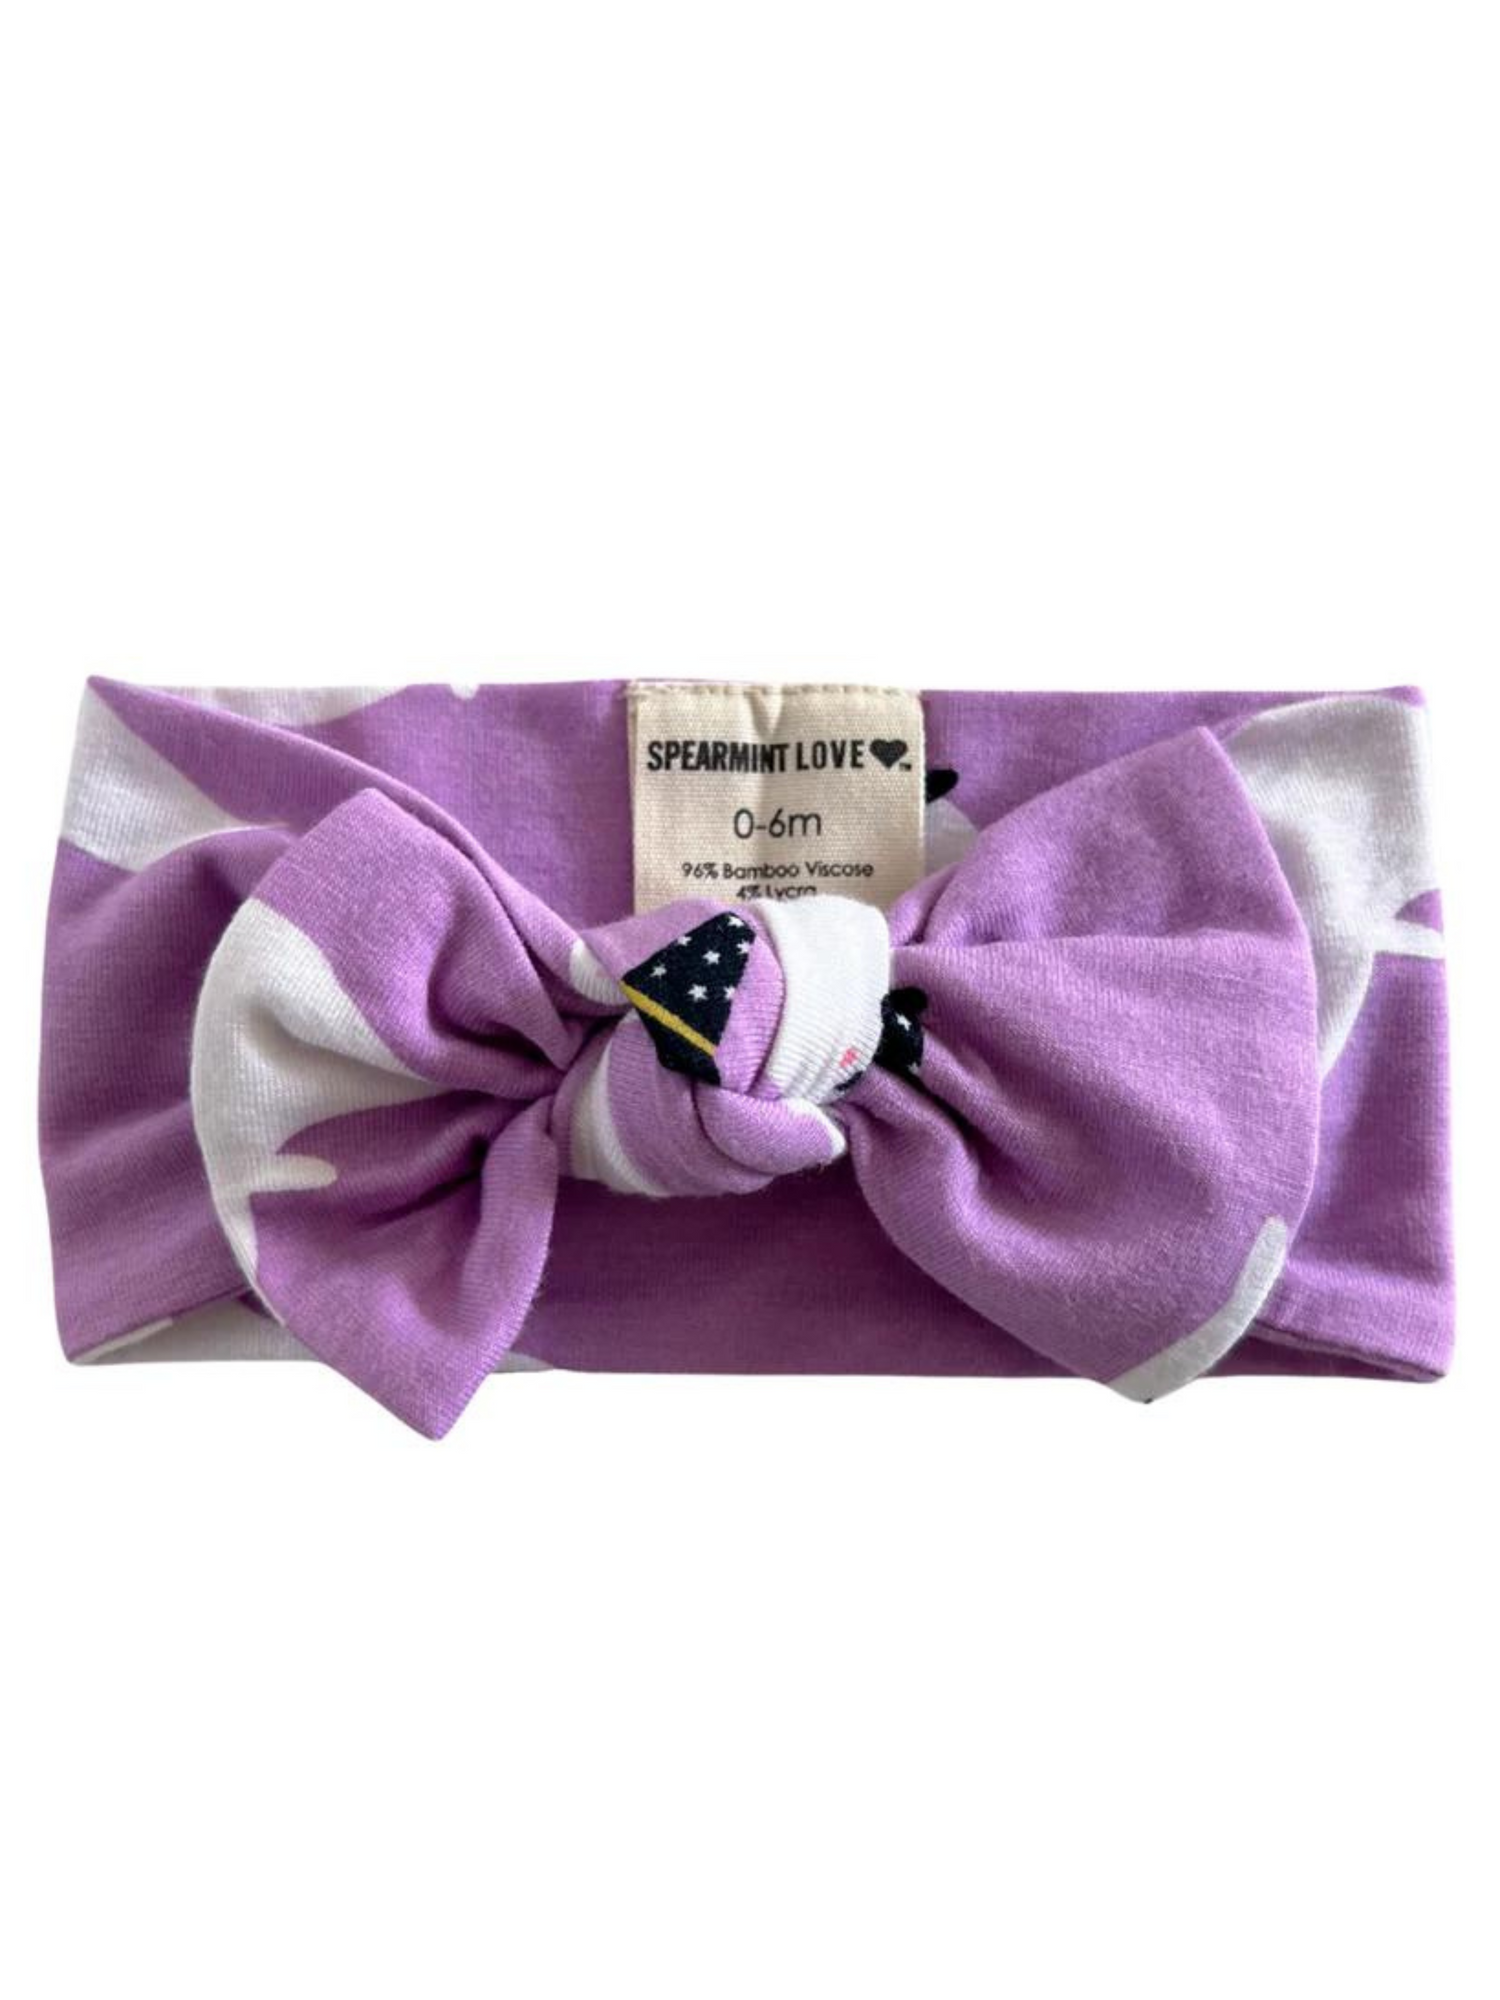 HALLOWEEN PURPLE GHOST KNOT BOW HEADBAND - THE LITTLE EAGLE BOUTIQUE